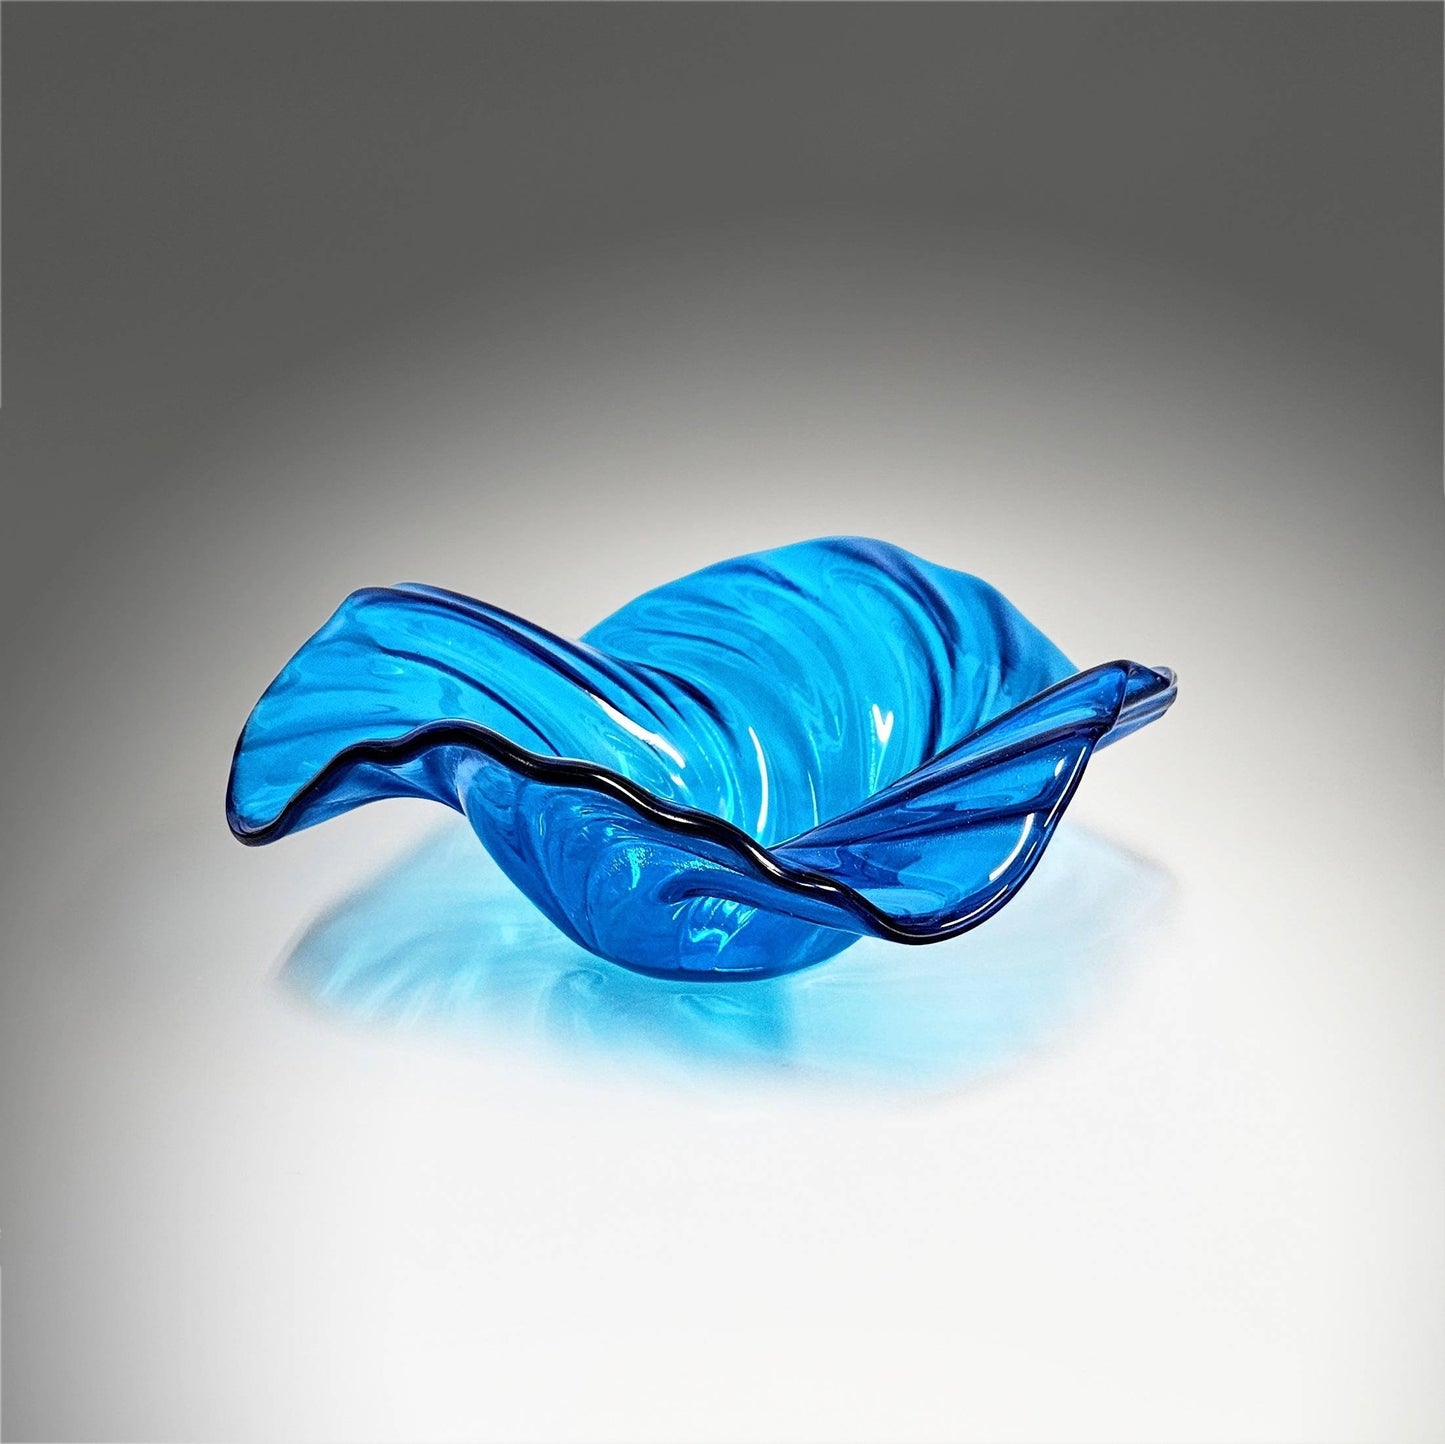 Glass Art Wave Bowl in Turquoise Blue